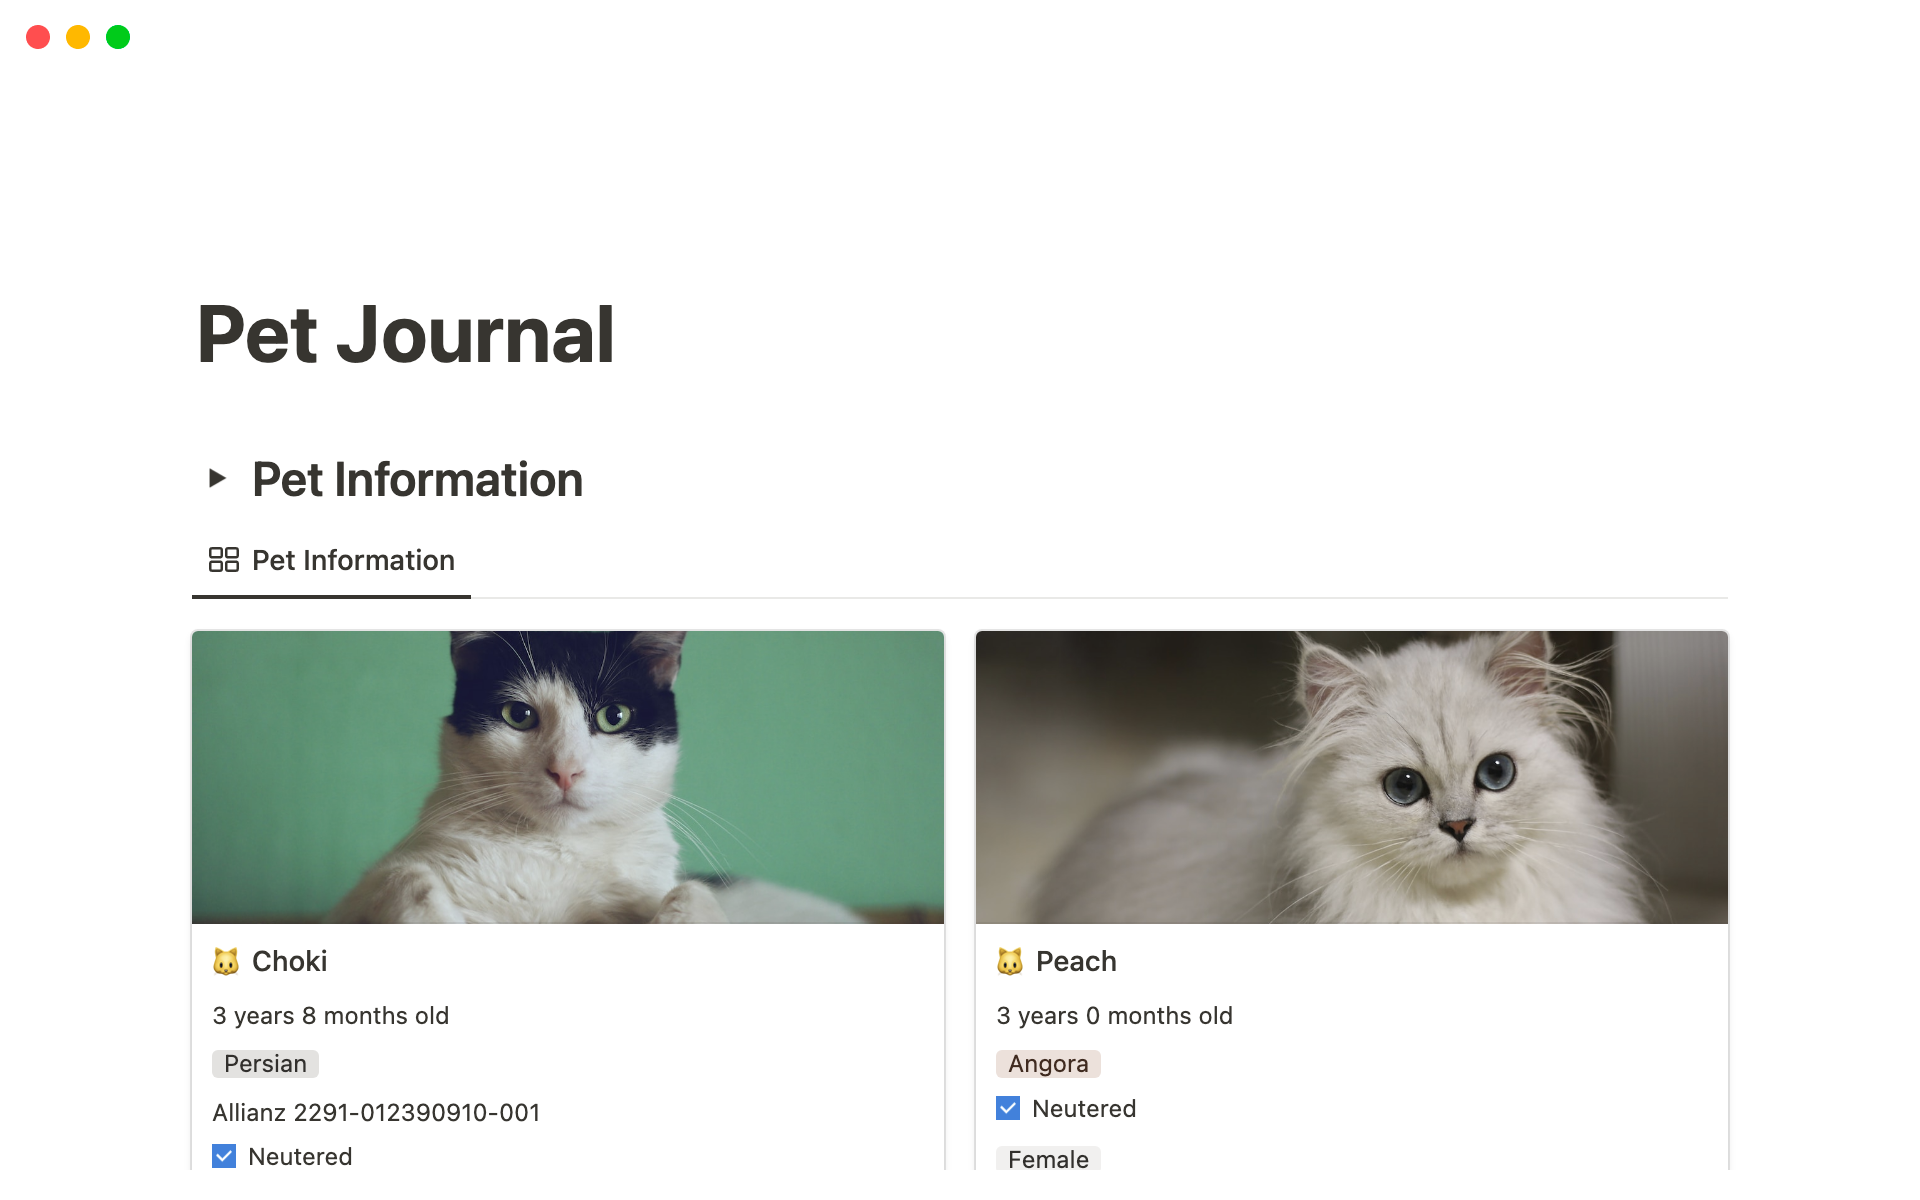 The Pet Journal is a comprehensive tool for pet owners to manage their pet's health, grooming, vaccinations, and more.